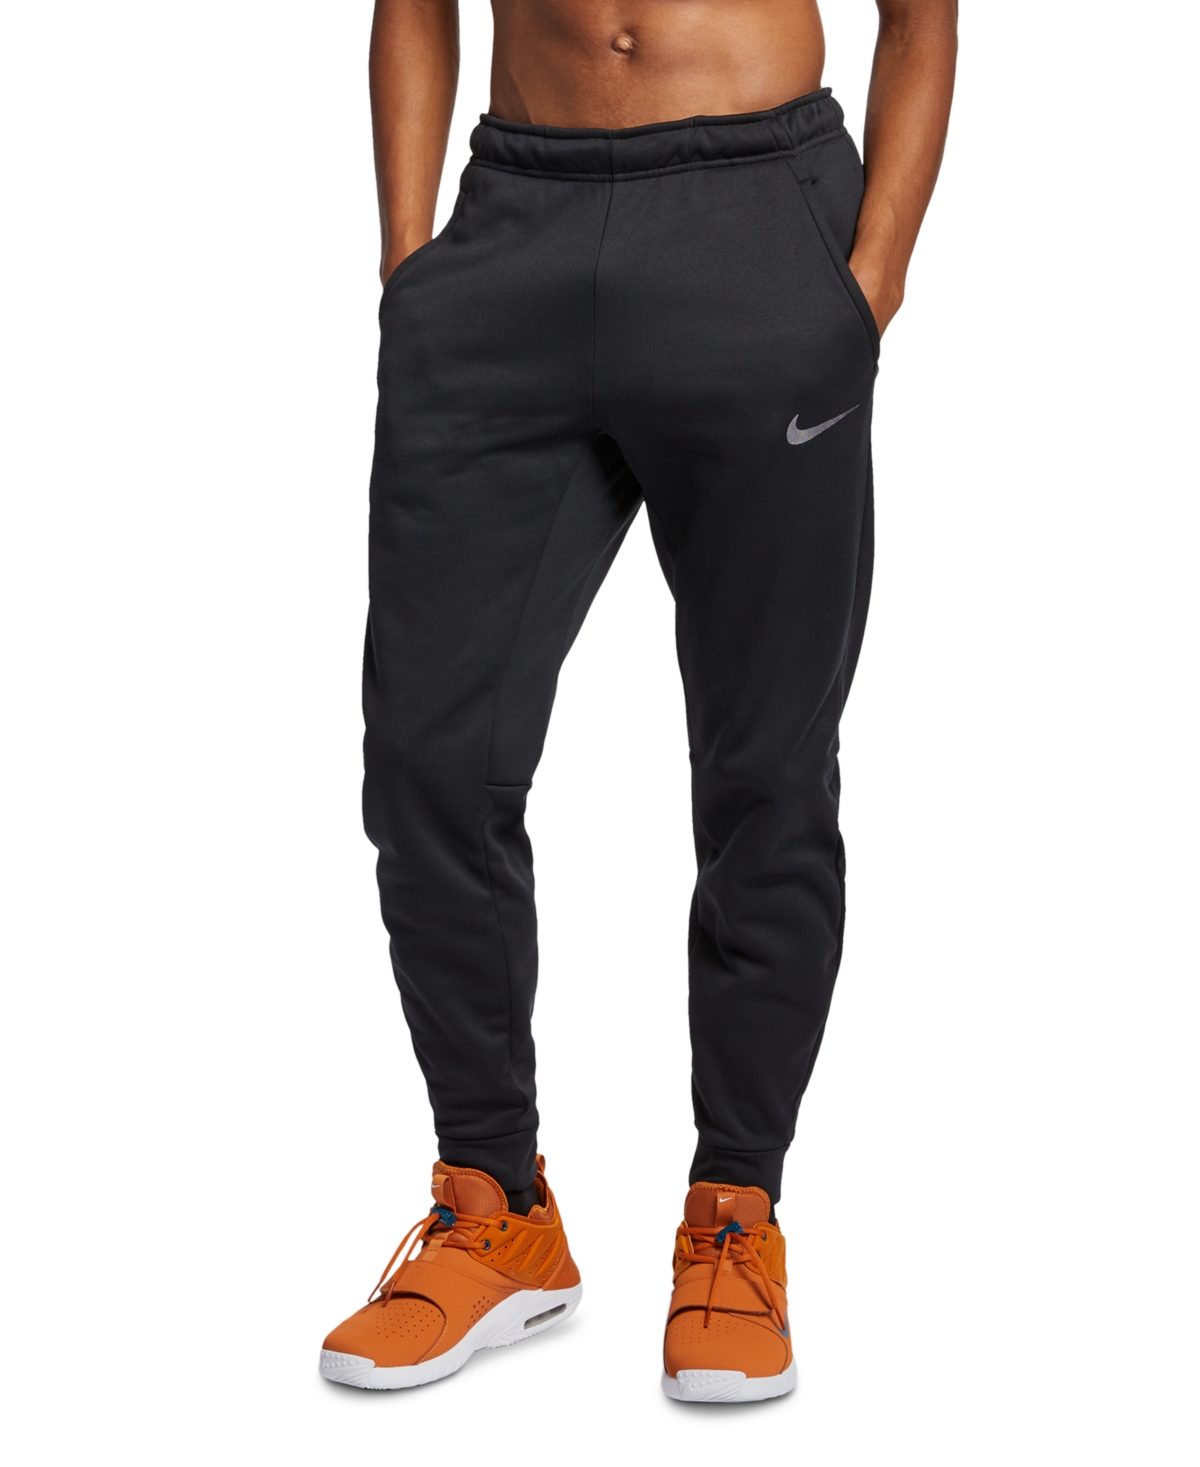 UPC 886668336169 product image for Nike Men's Therma Tapered Training Pants | upcitemdb.com